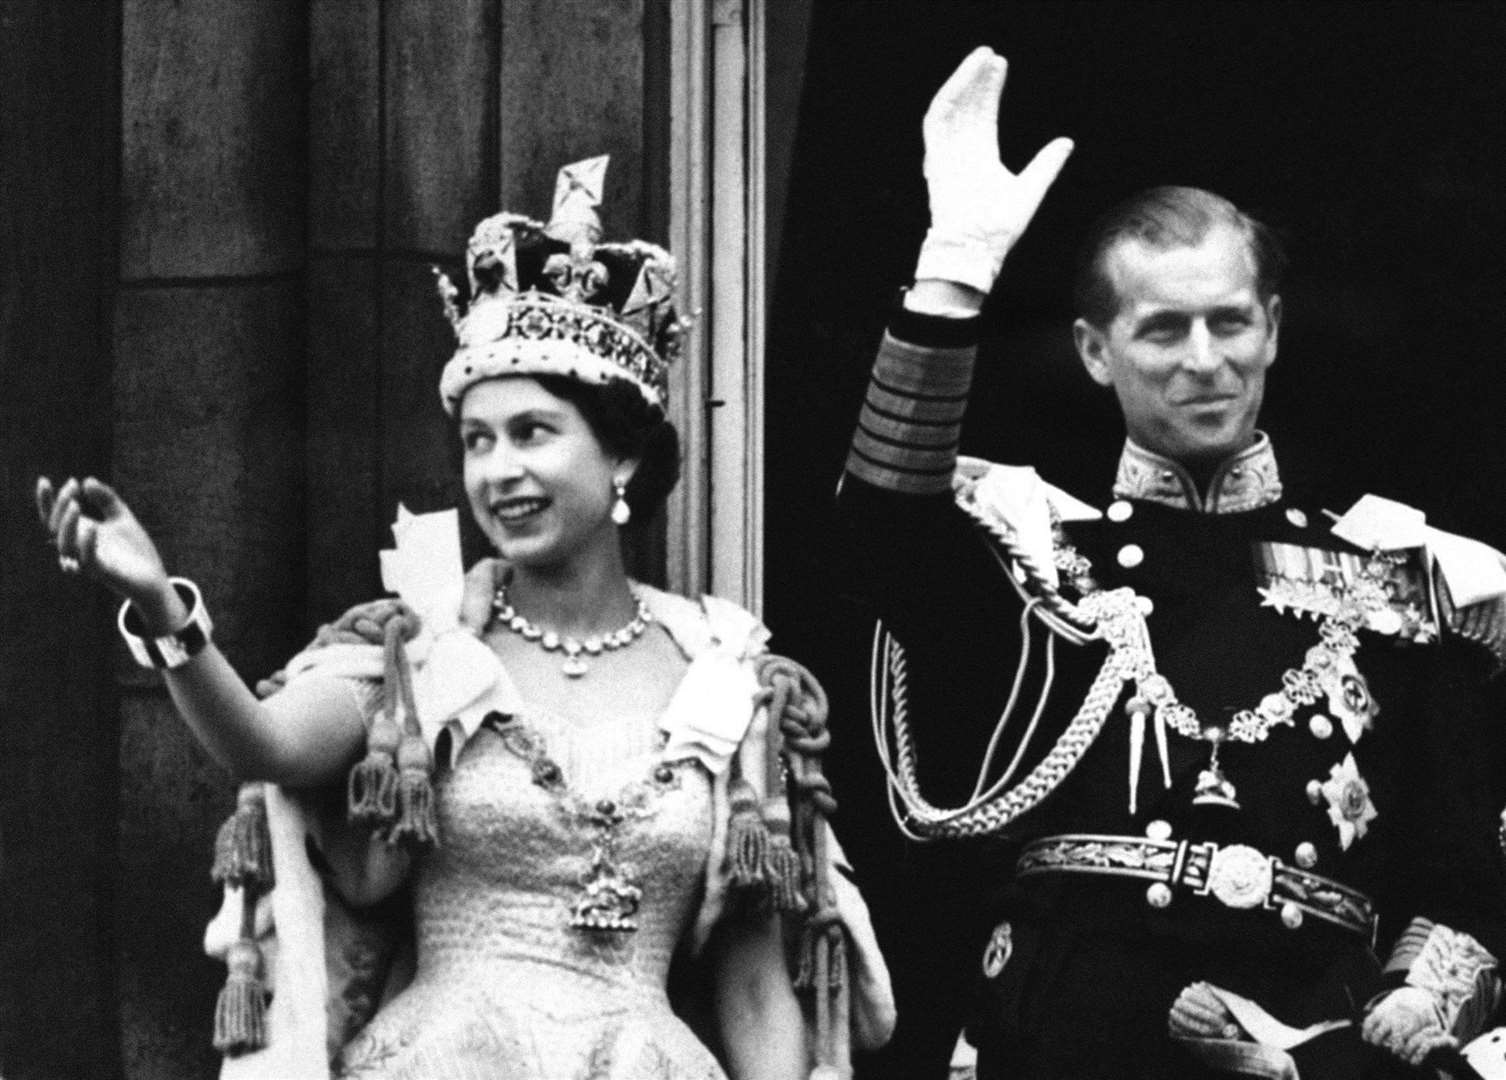 The Queen's Coronation took place in June, 1953